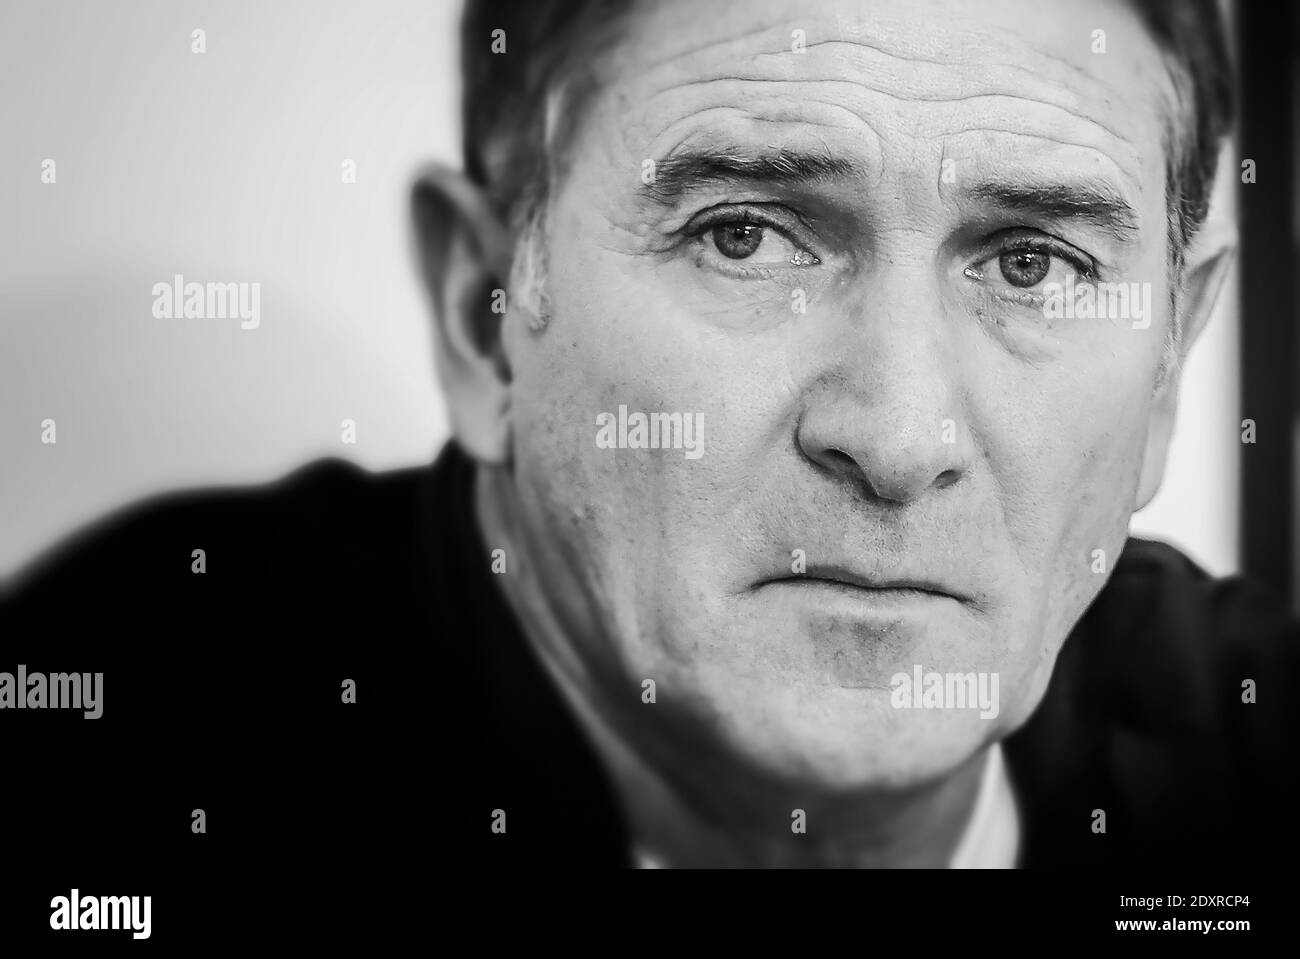 Standard's head coach Philippe Montanier pictured during a press conference of Belgian soccer team Standard de Liege, ahead of Jupiler Pro League matc Stock Photo